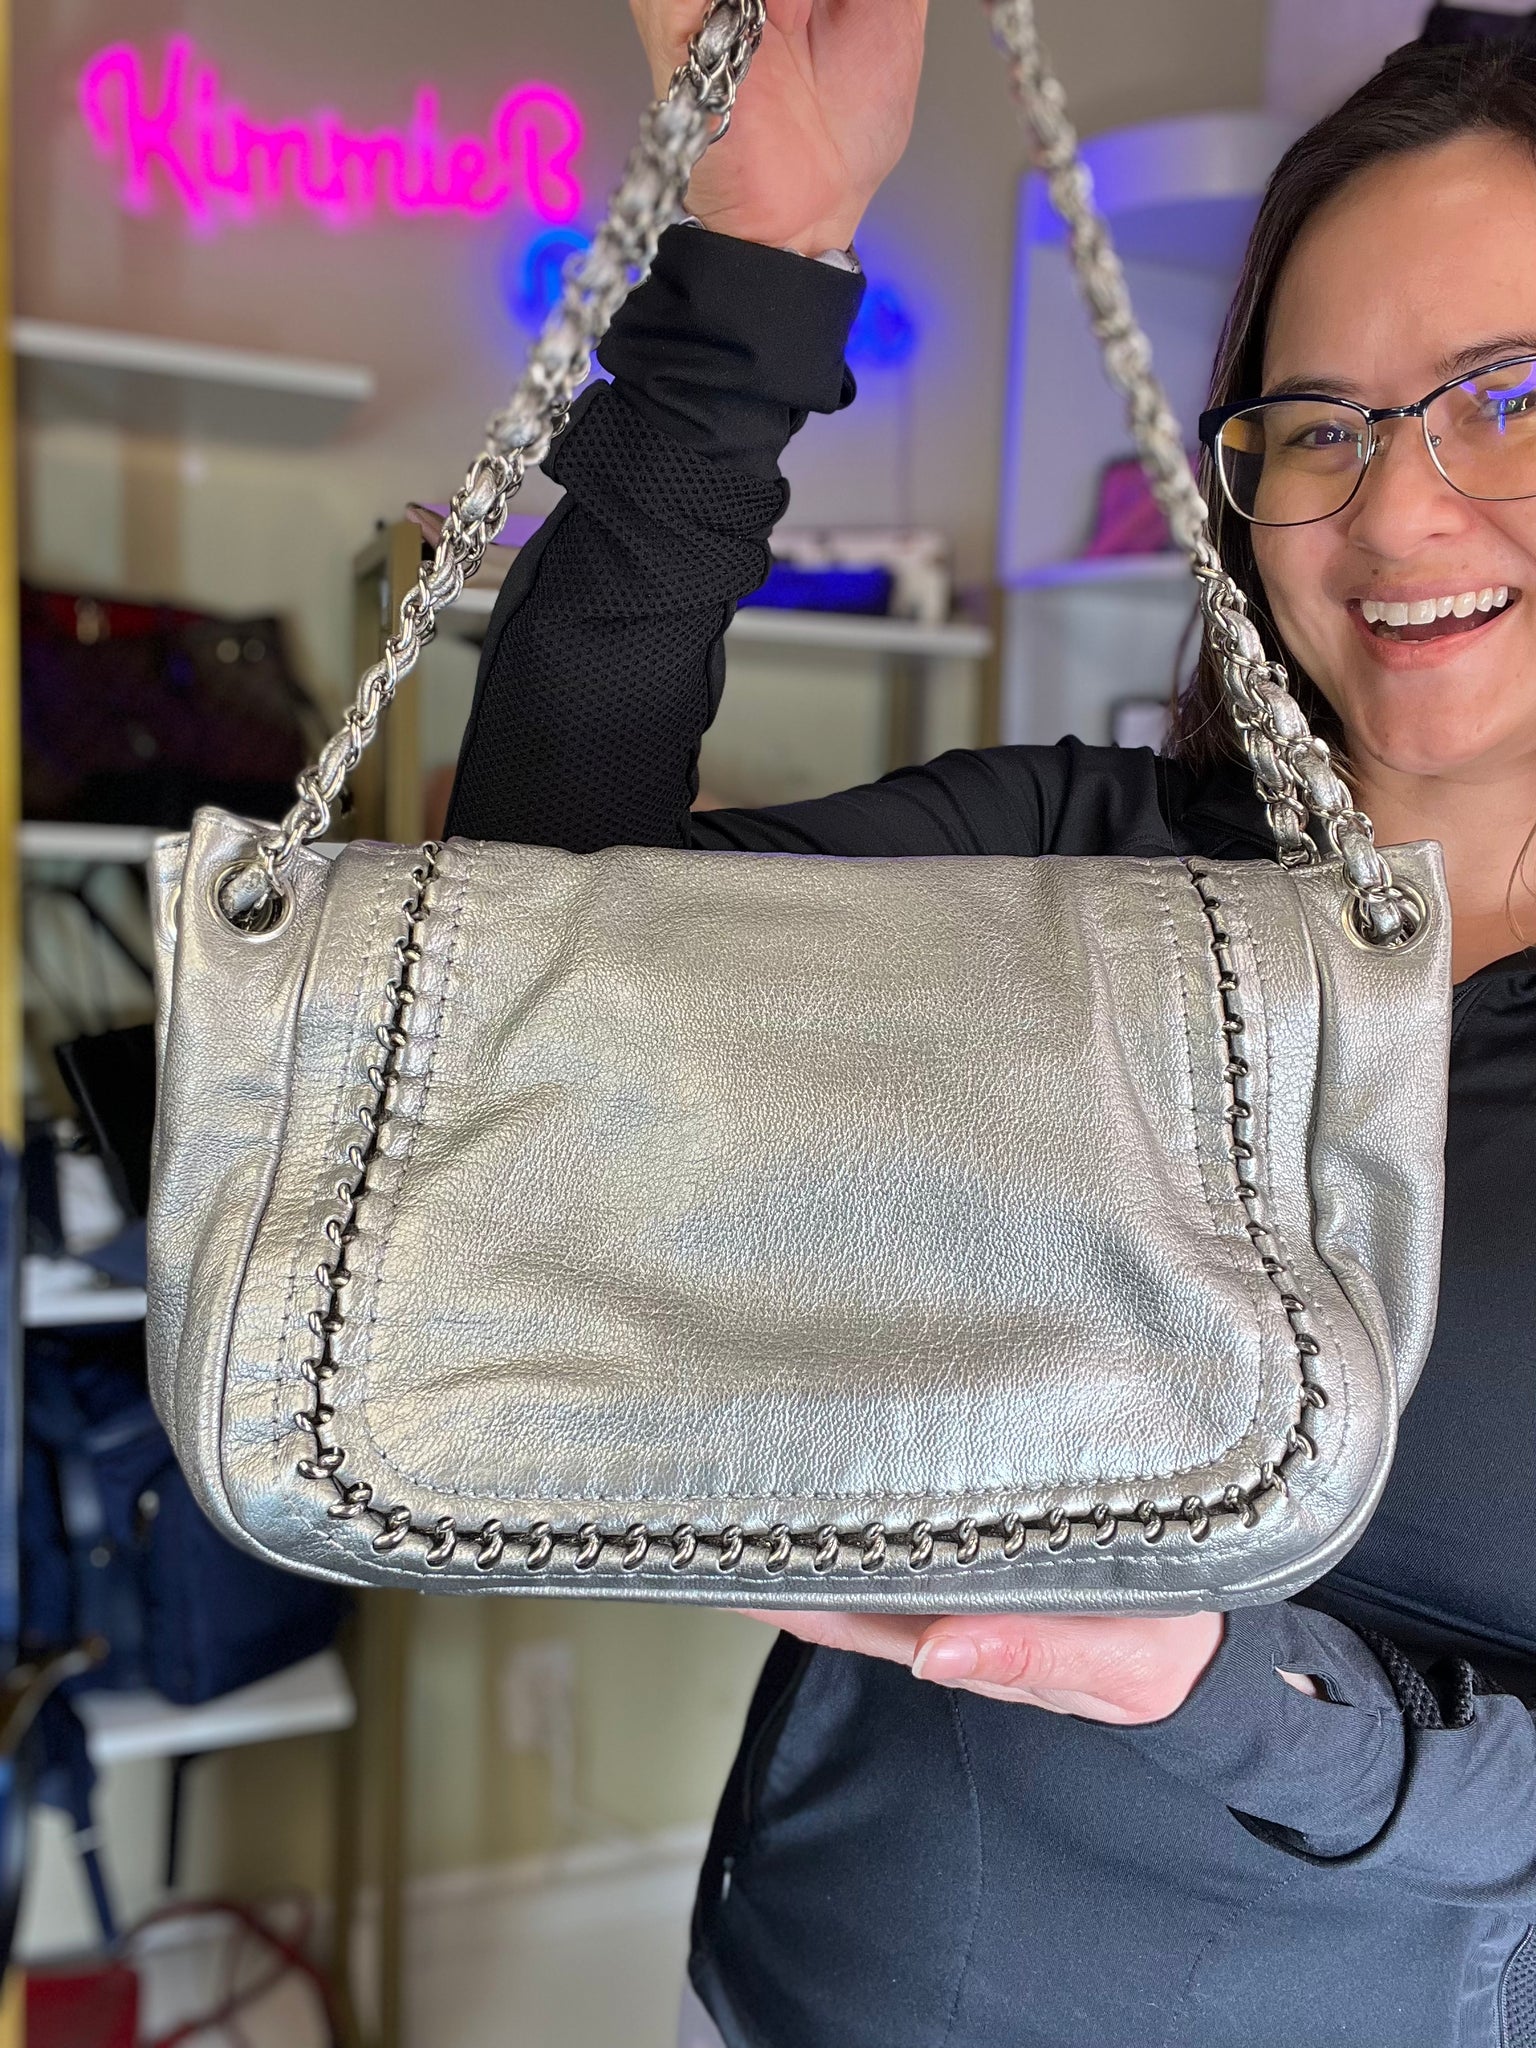 Chanel Silver Leather Luxe Ligne Accordion Flap Bag